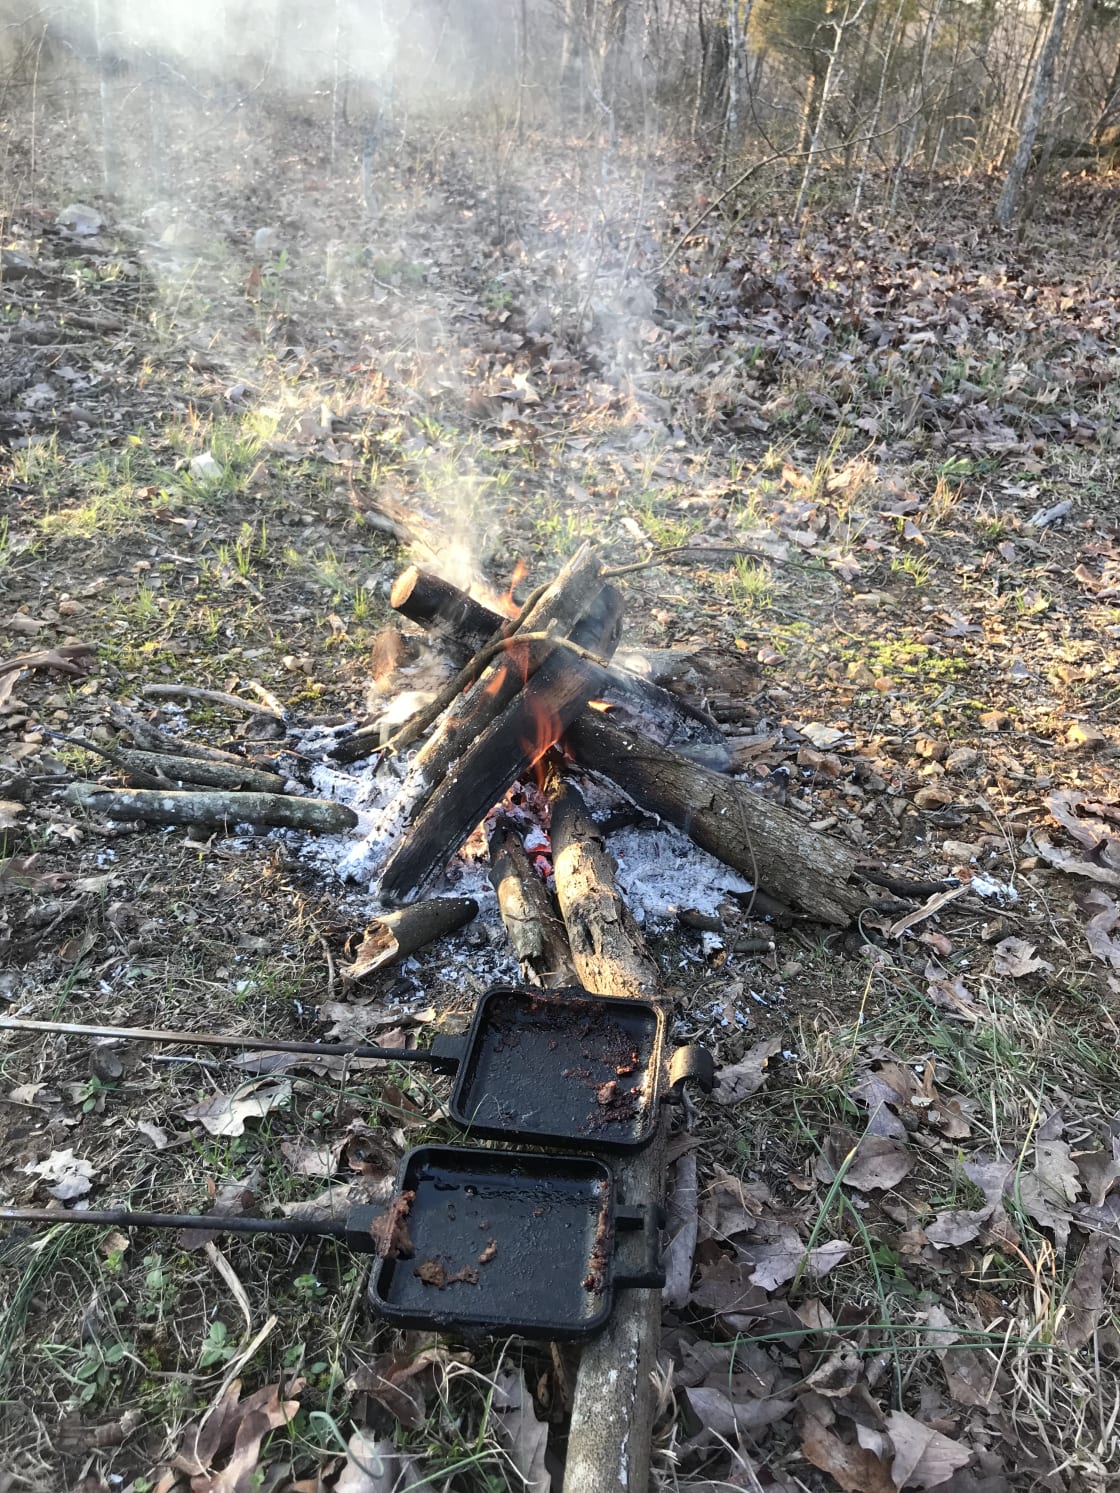 A small fire to cook over